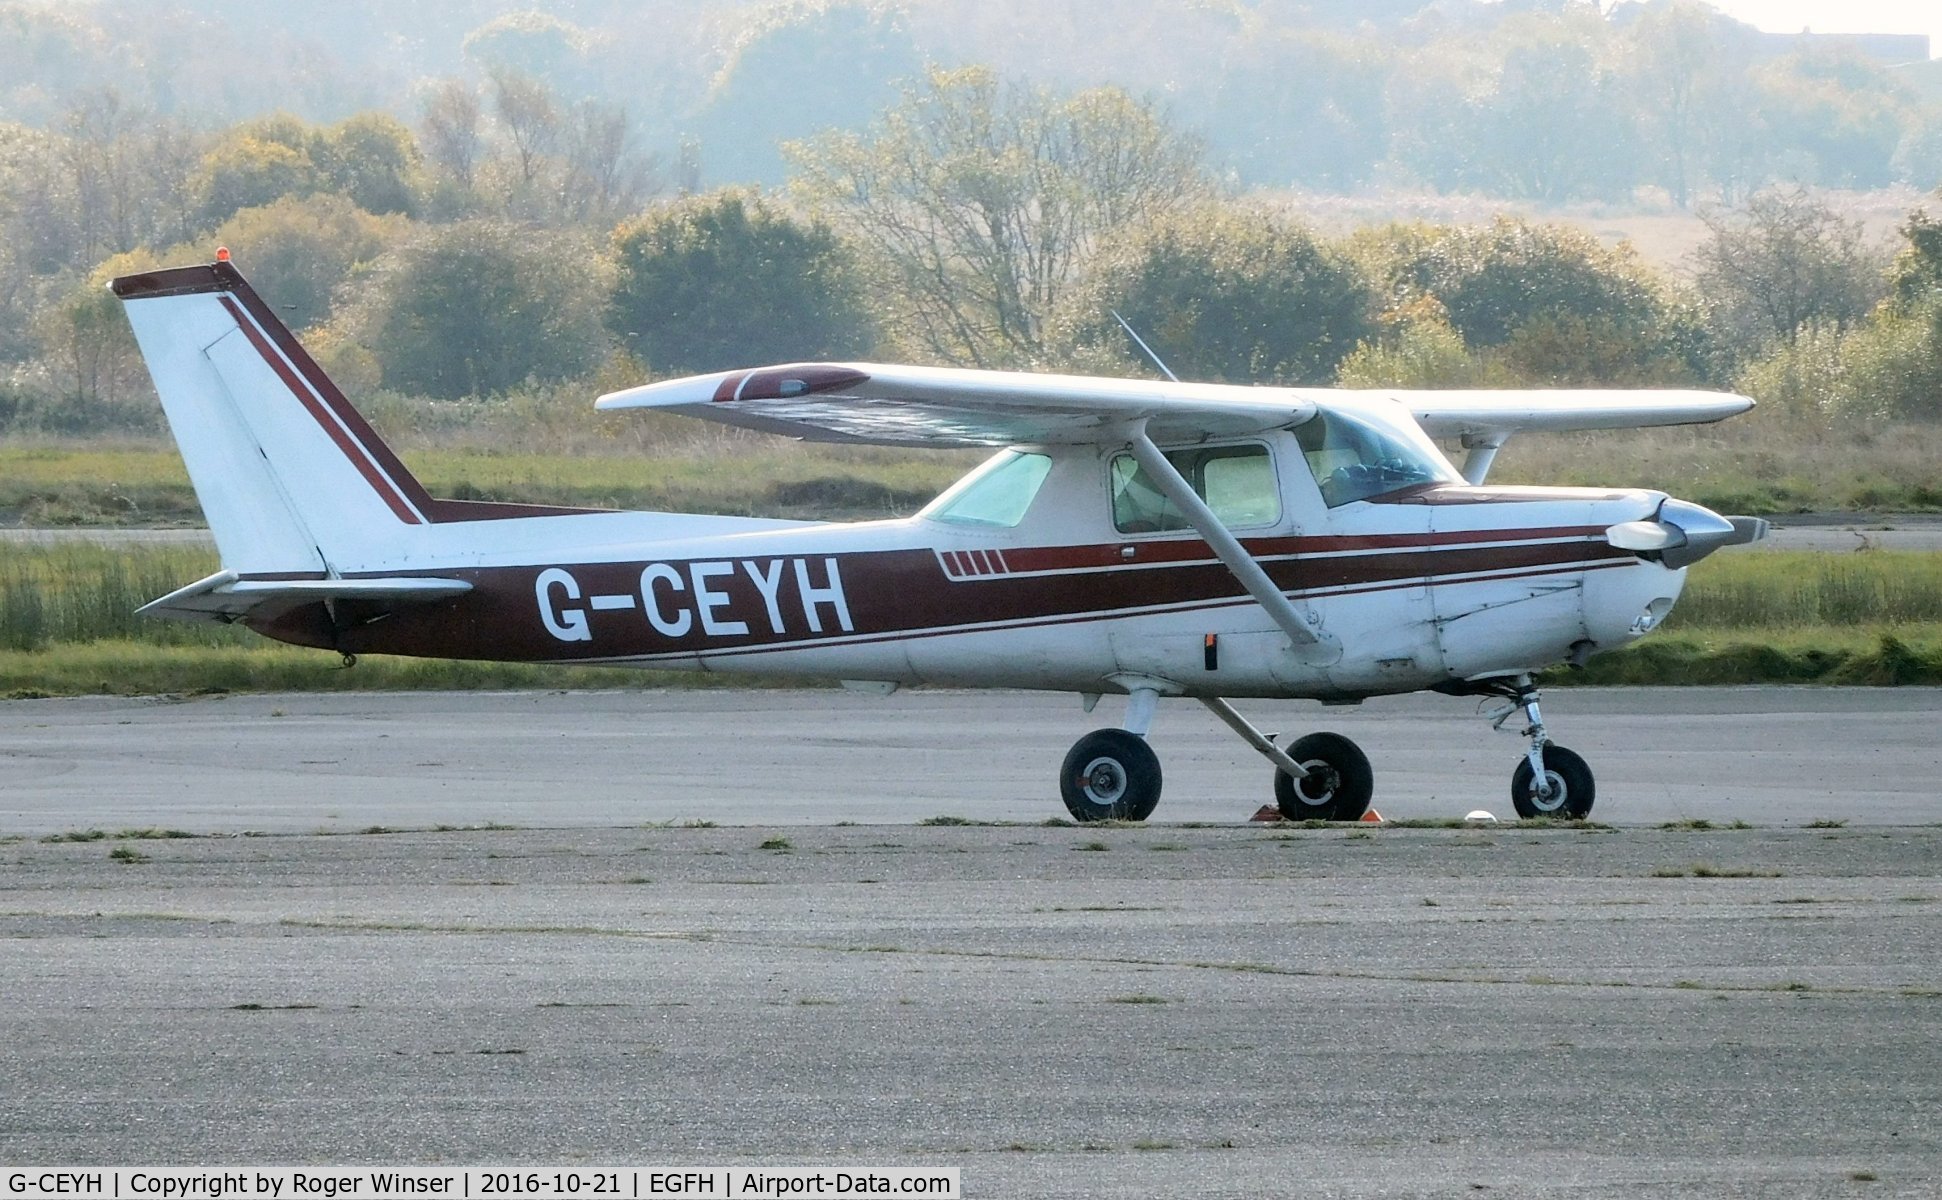 G-CEYH, 1978 Cessna 152 C/N 15282689, Visiting Cessna 152 operated by Cornwall Flying Club.